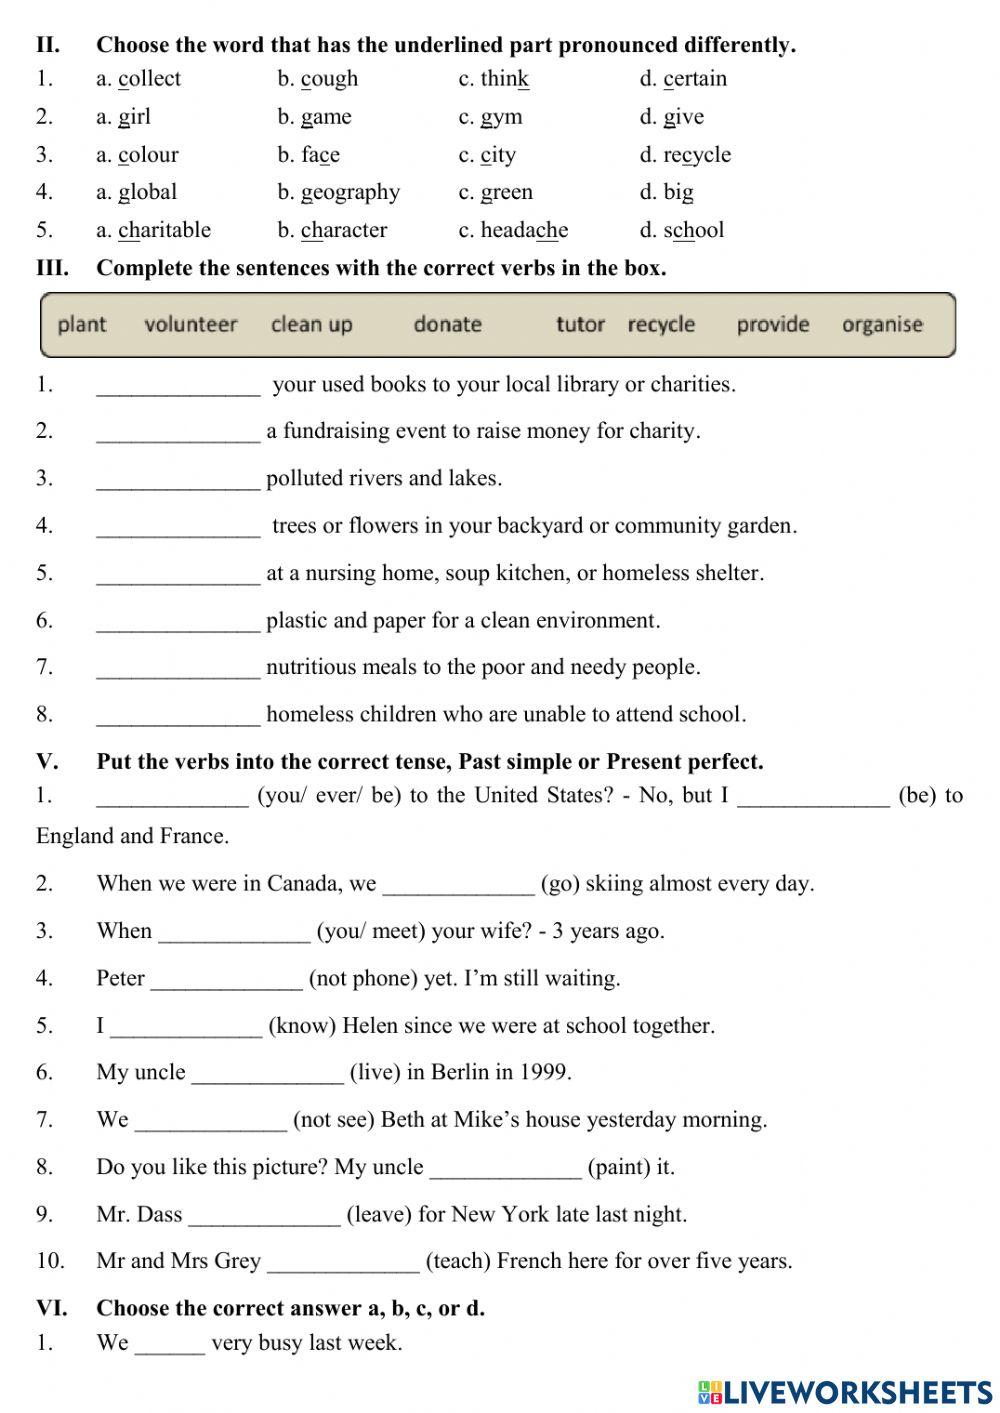 Tieng Anh 7 - Unit 3 exercises (MLH) (1)